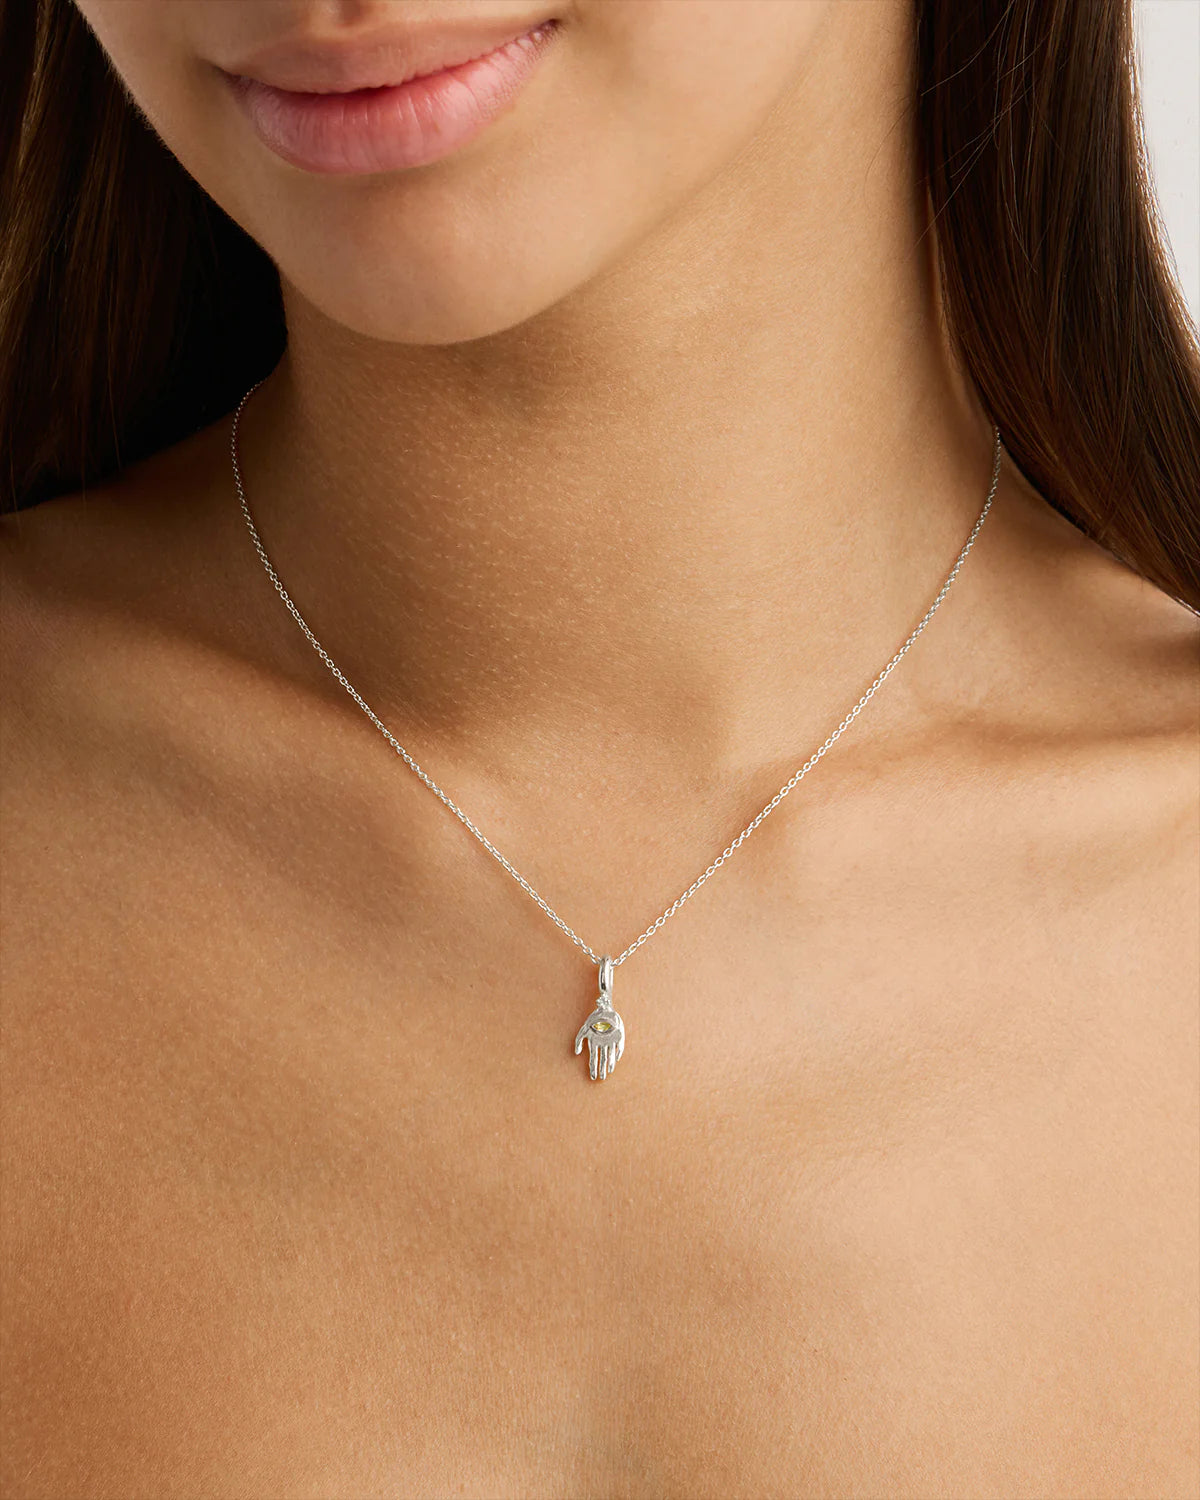 GUIDED SOUL NECKLACE - 18KT VERMEIL GOLD